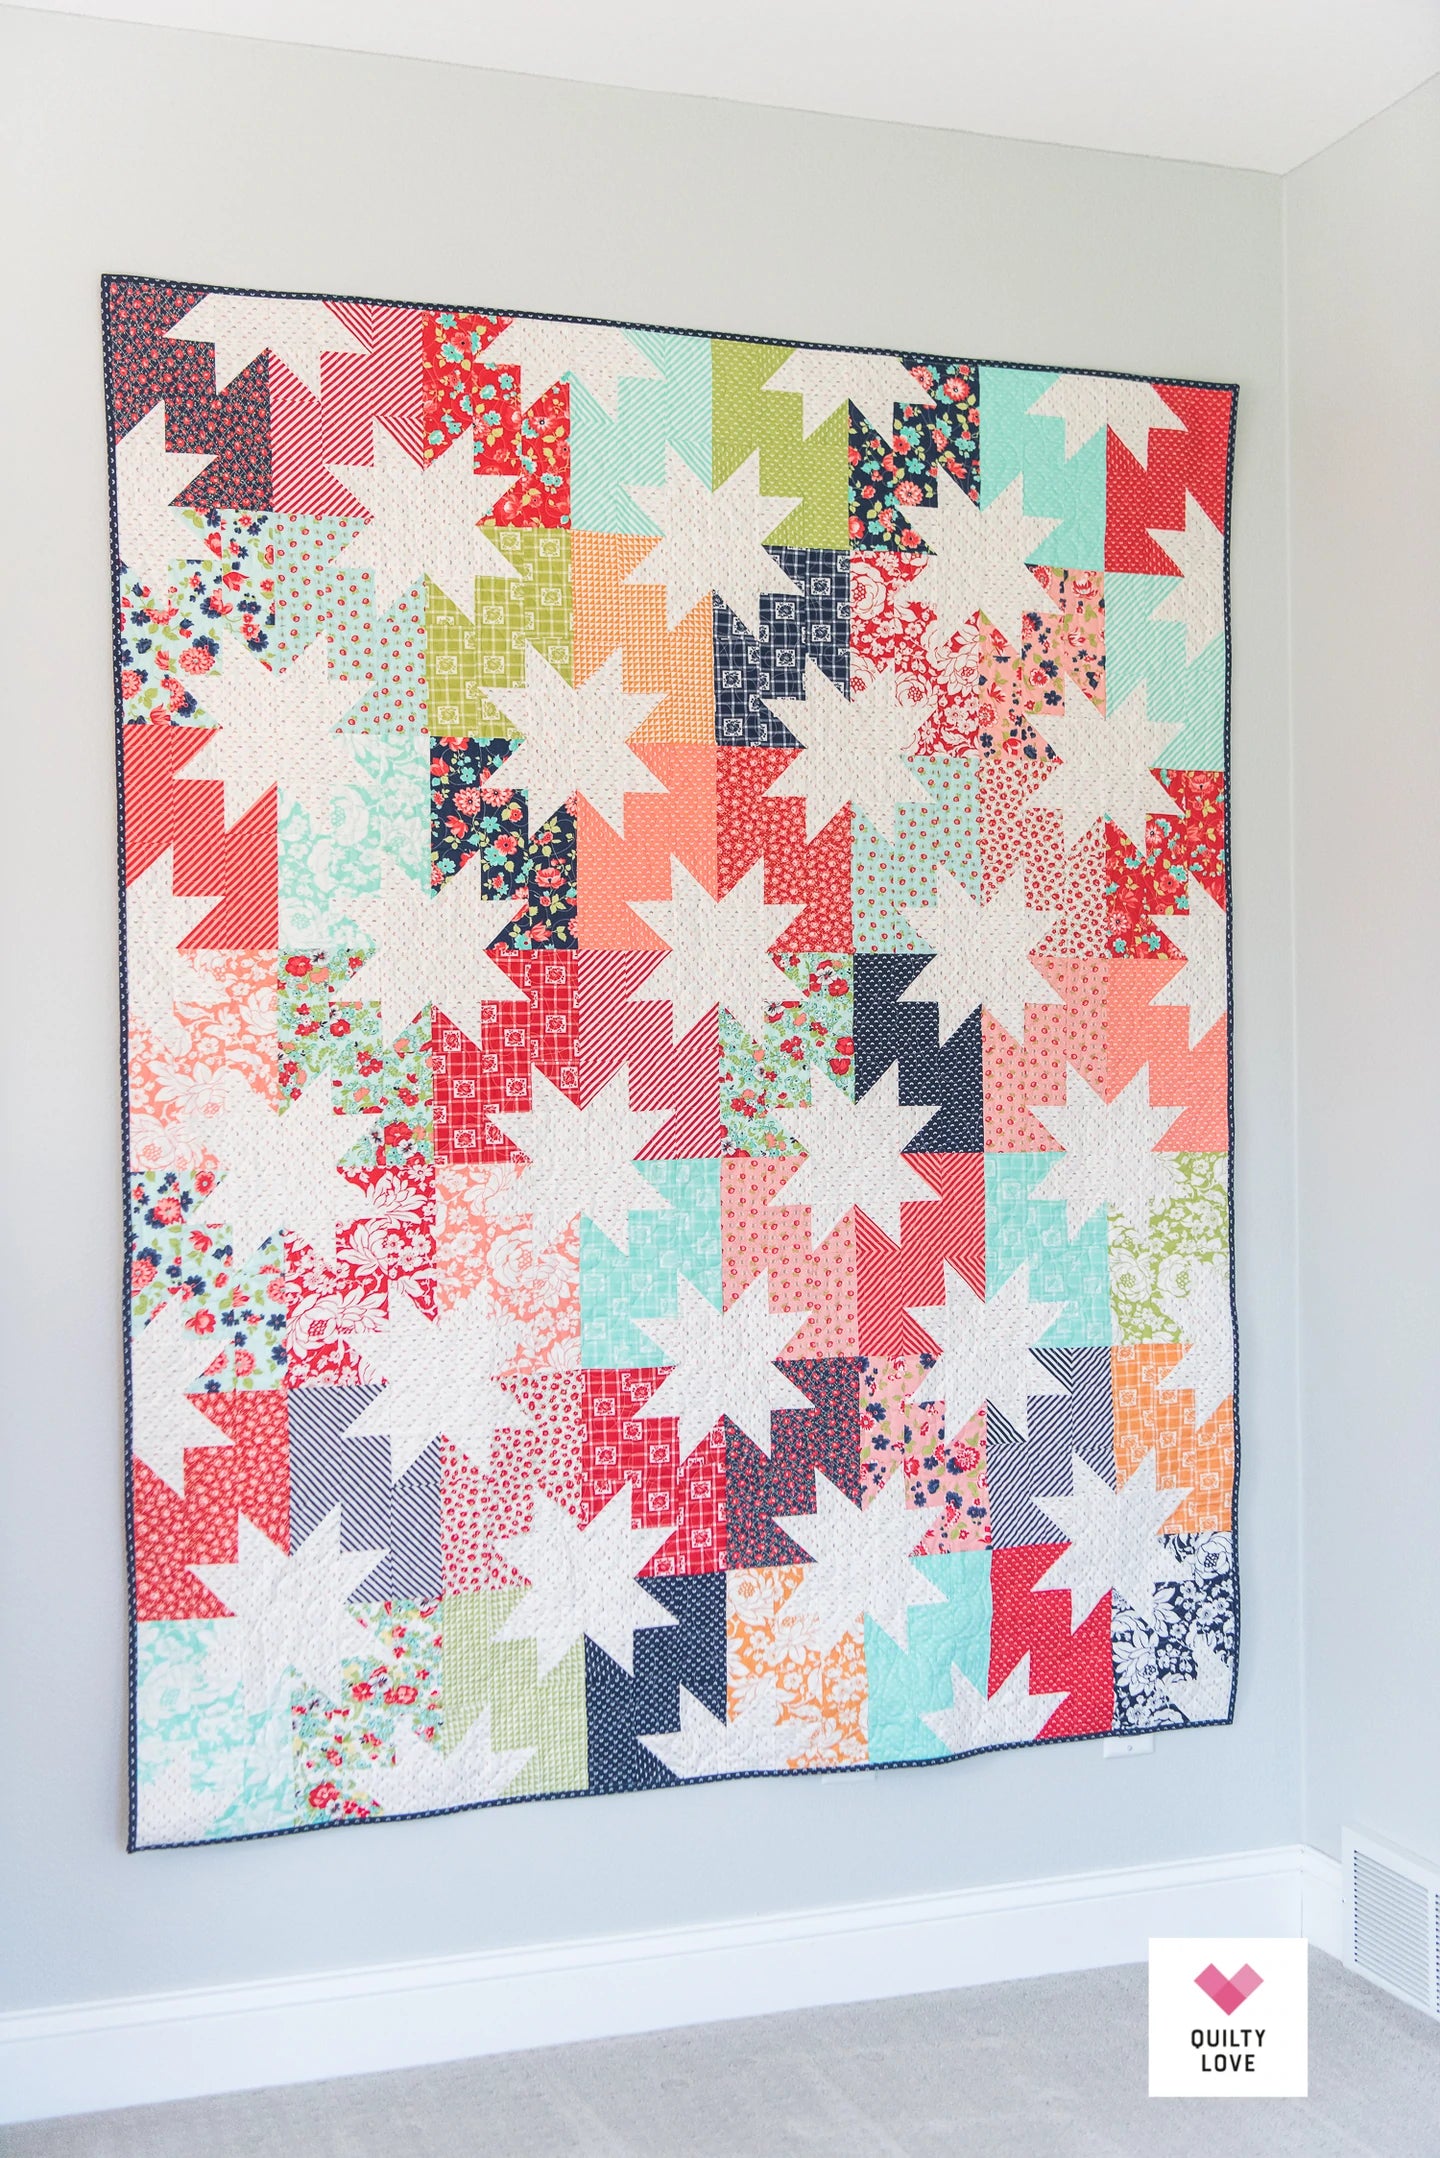 Star Pop Quilt Pattern - Quilty Love from Emily Dennis